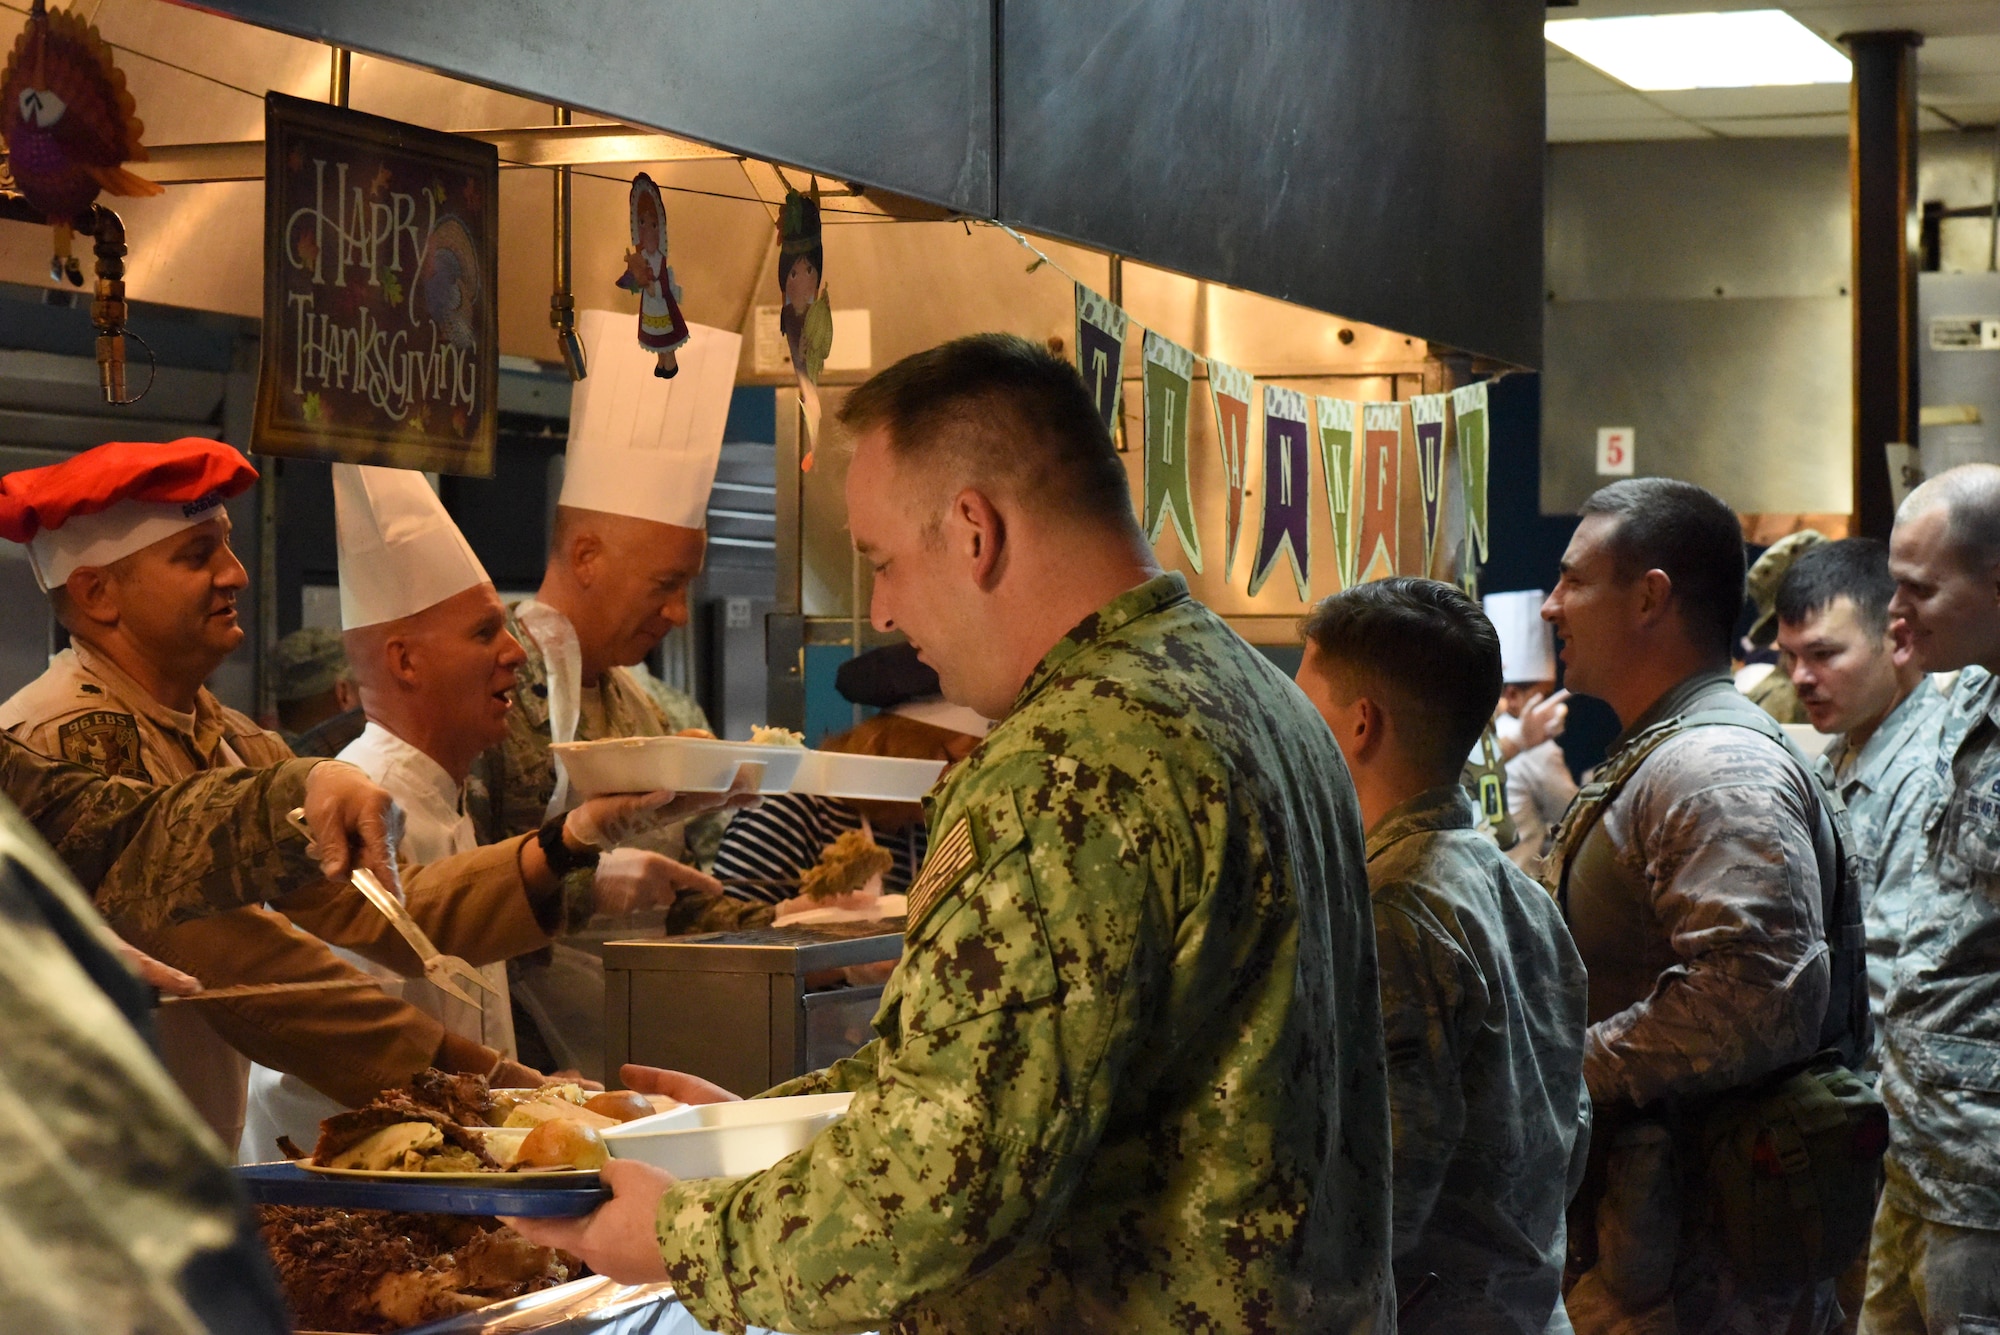 Senior leaders with the 379th Air Expeditionary Wing team up with the 379th Expeditionary Force Support Squadron dining facility team to serve Thanksgiving lunch and dinner at Al Udeid Air Base, Qatar, Nov. 24, 2016. In celebration of the holiday, the dining facility prepared a special feast for lunch and dinner that included many traditional Thanksgiving dishes. (U.S. Air Force photo by Senior Airman Cynthia A. Innocenti)